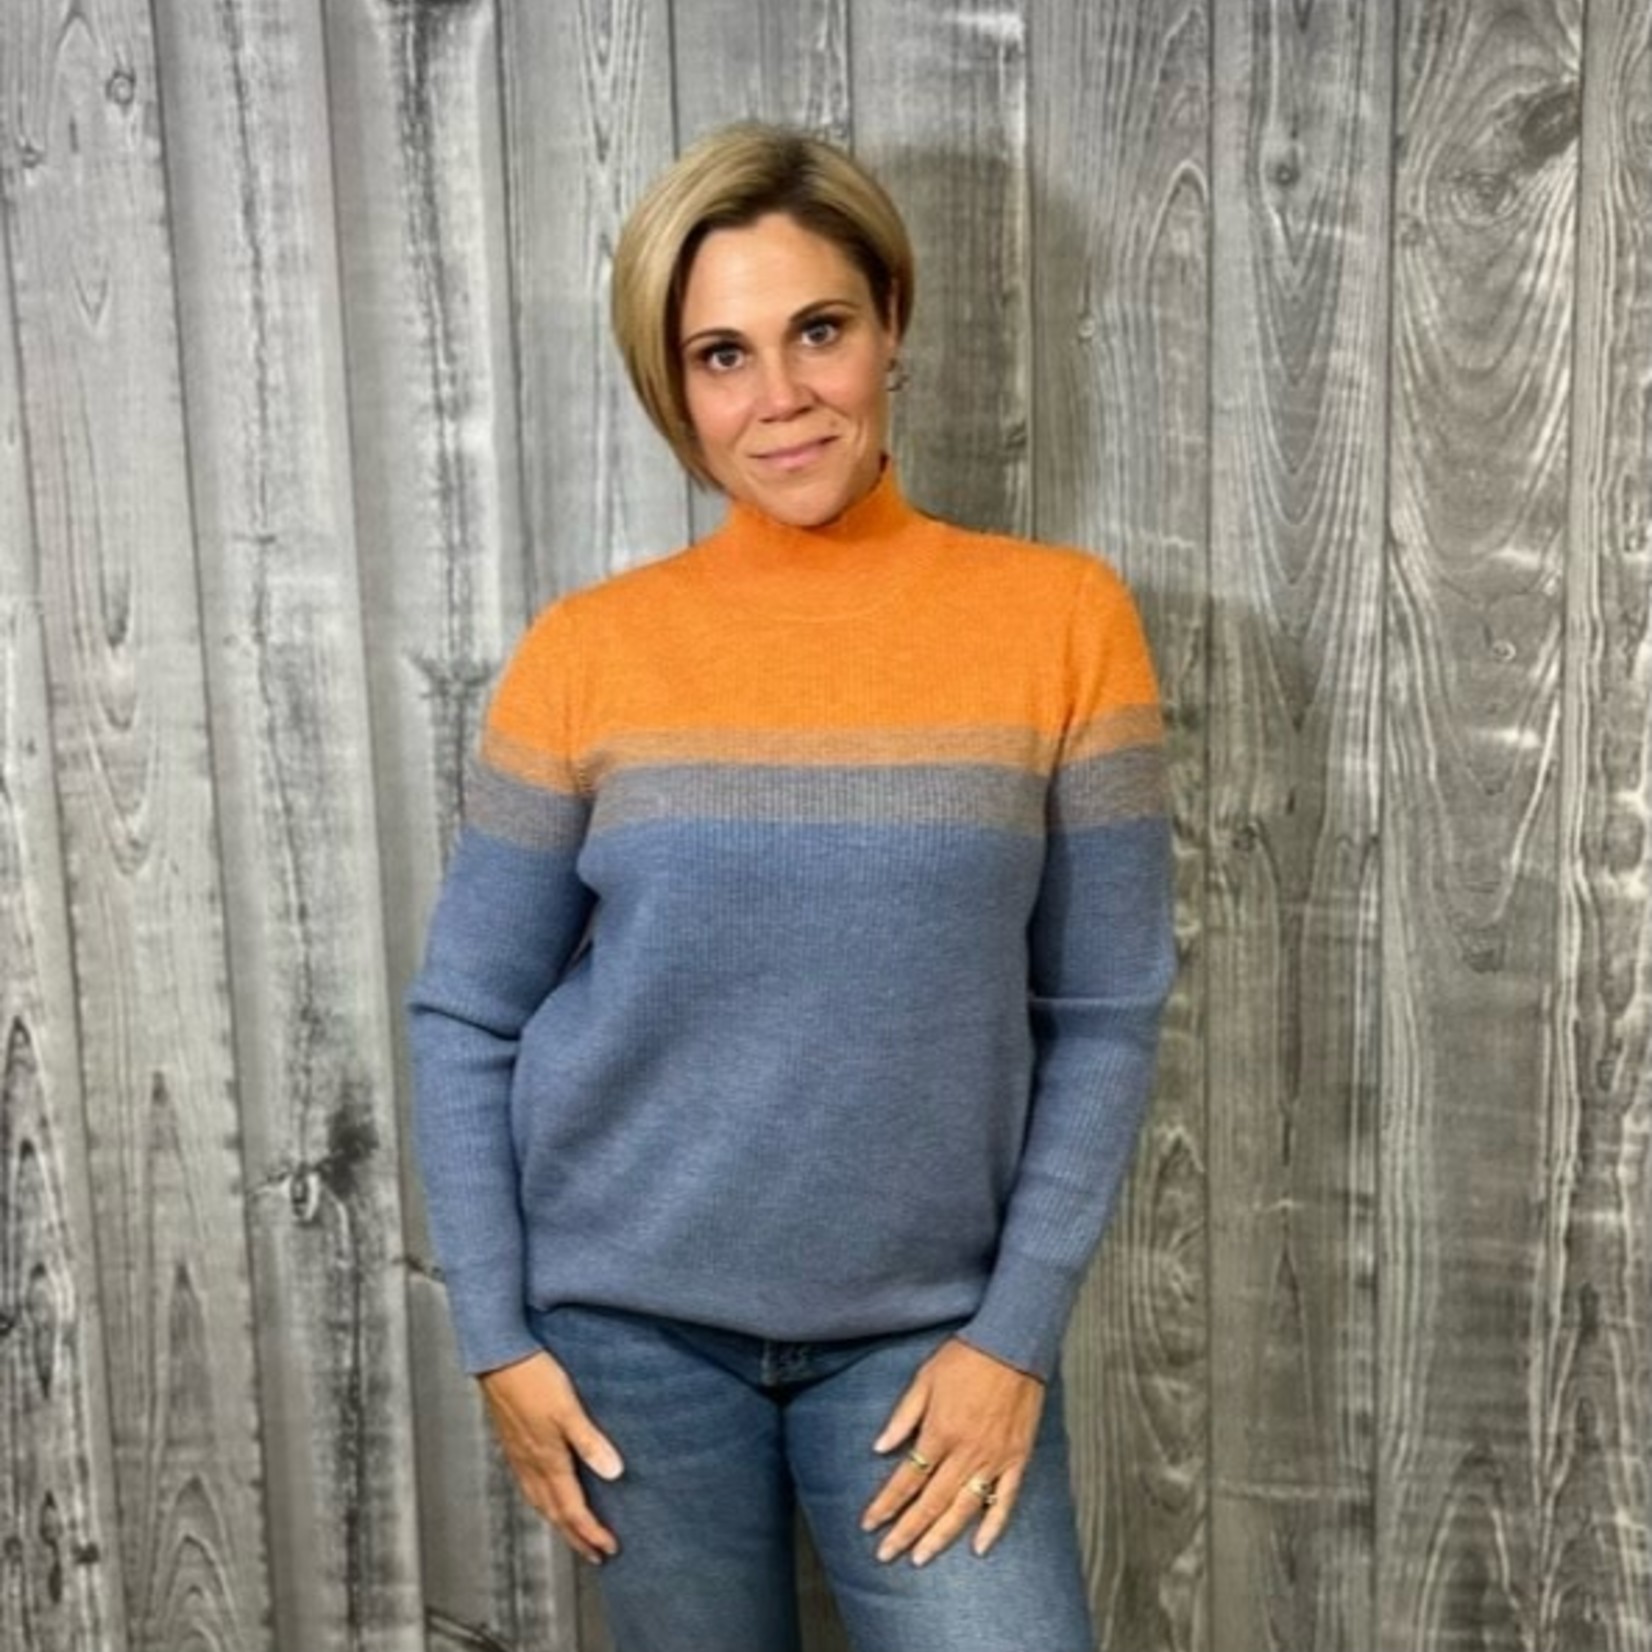 Ribbed Turtle Neck Sweater in Apricot/Periwinkle